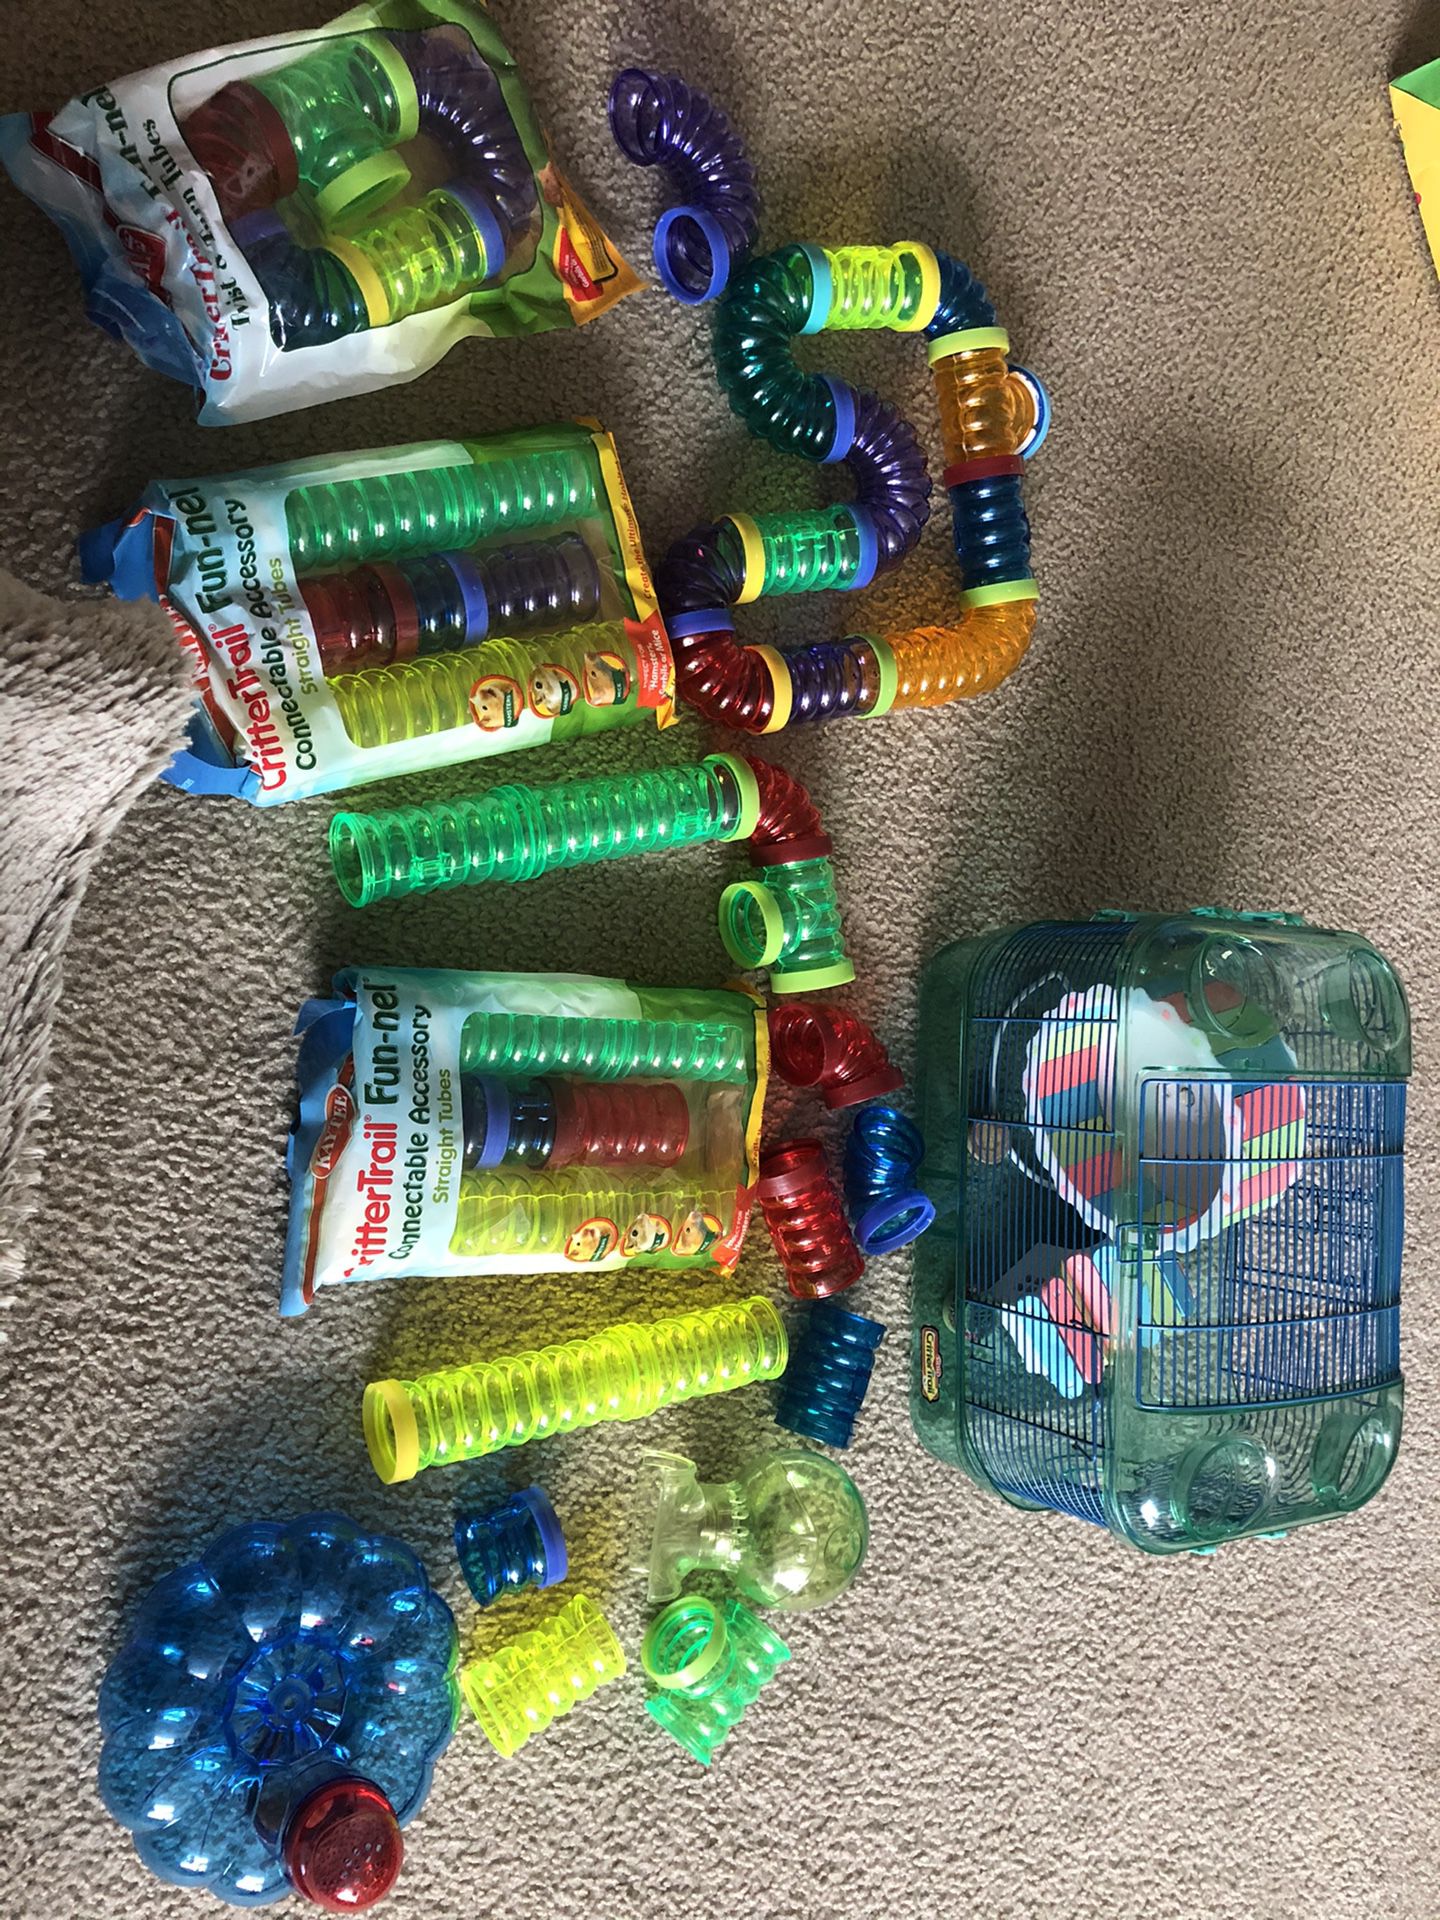 Kaytee hamster cage and accessories